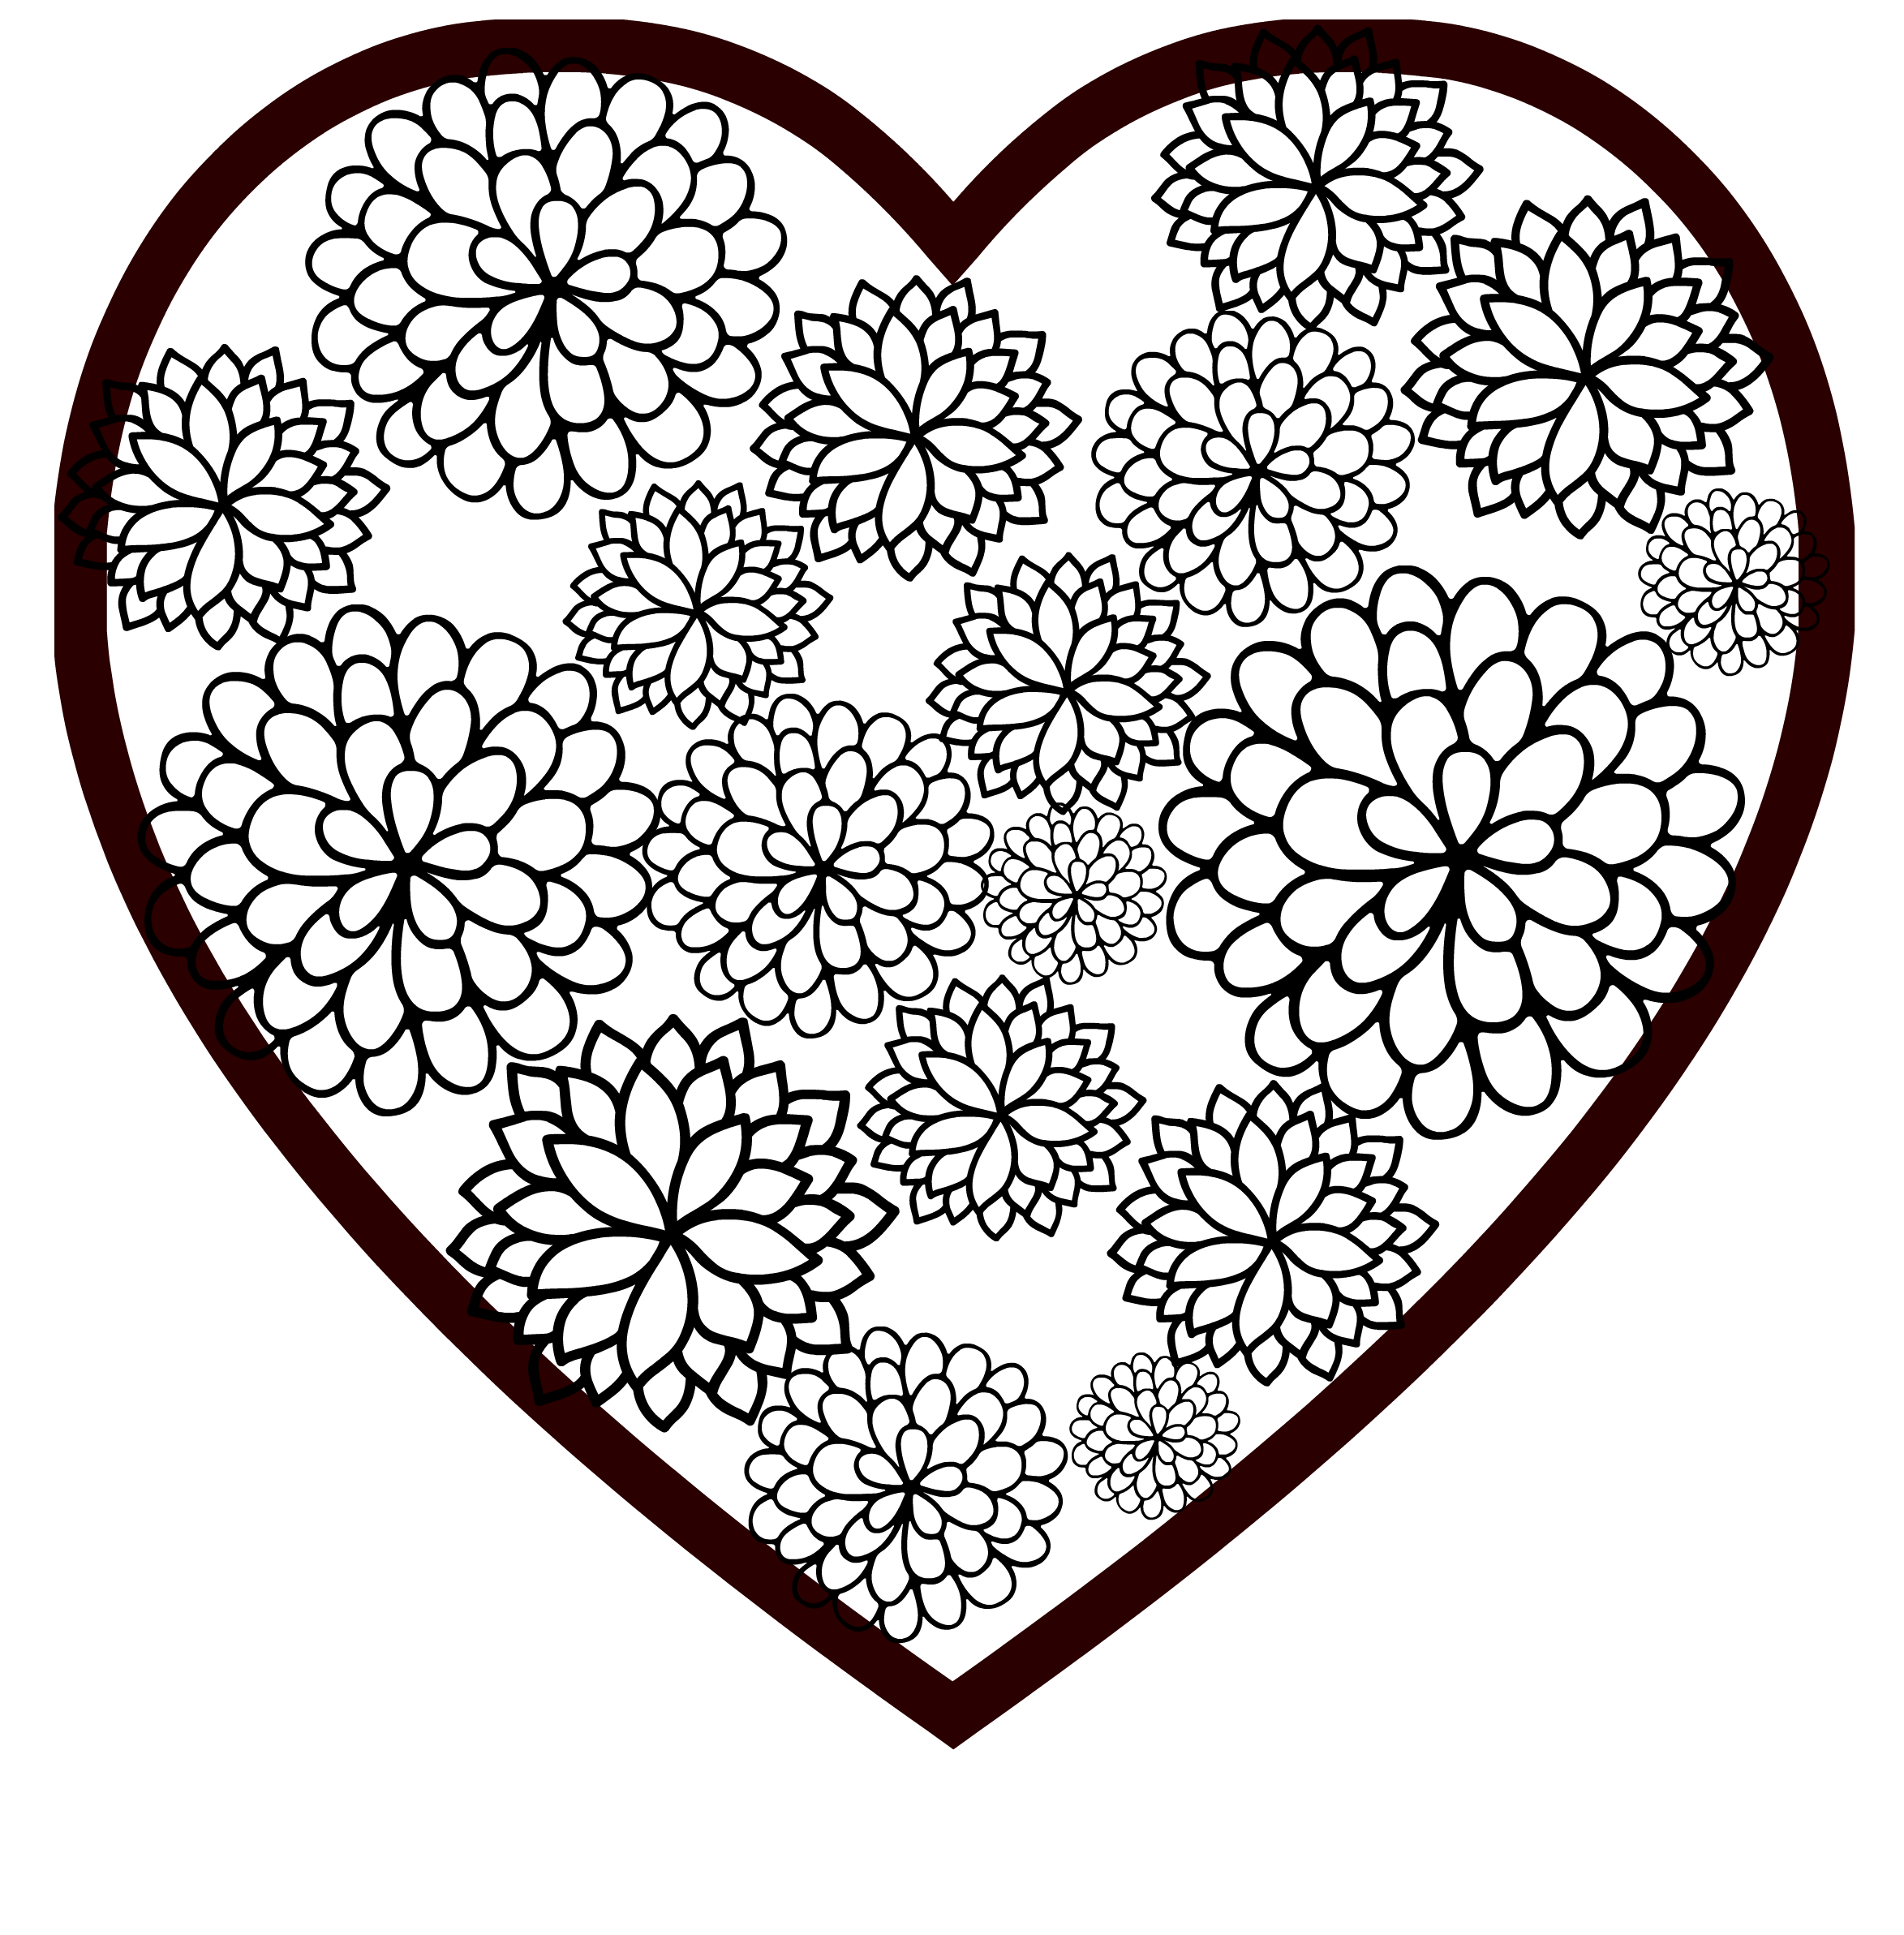 Floral heart Valentine printable coloring page.